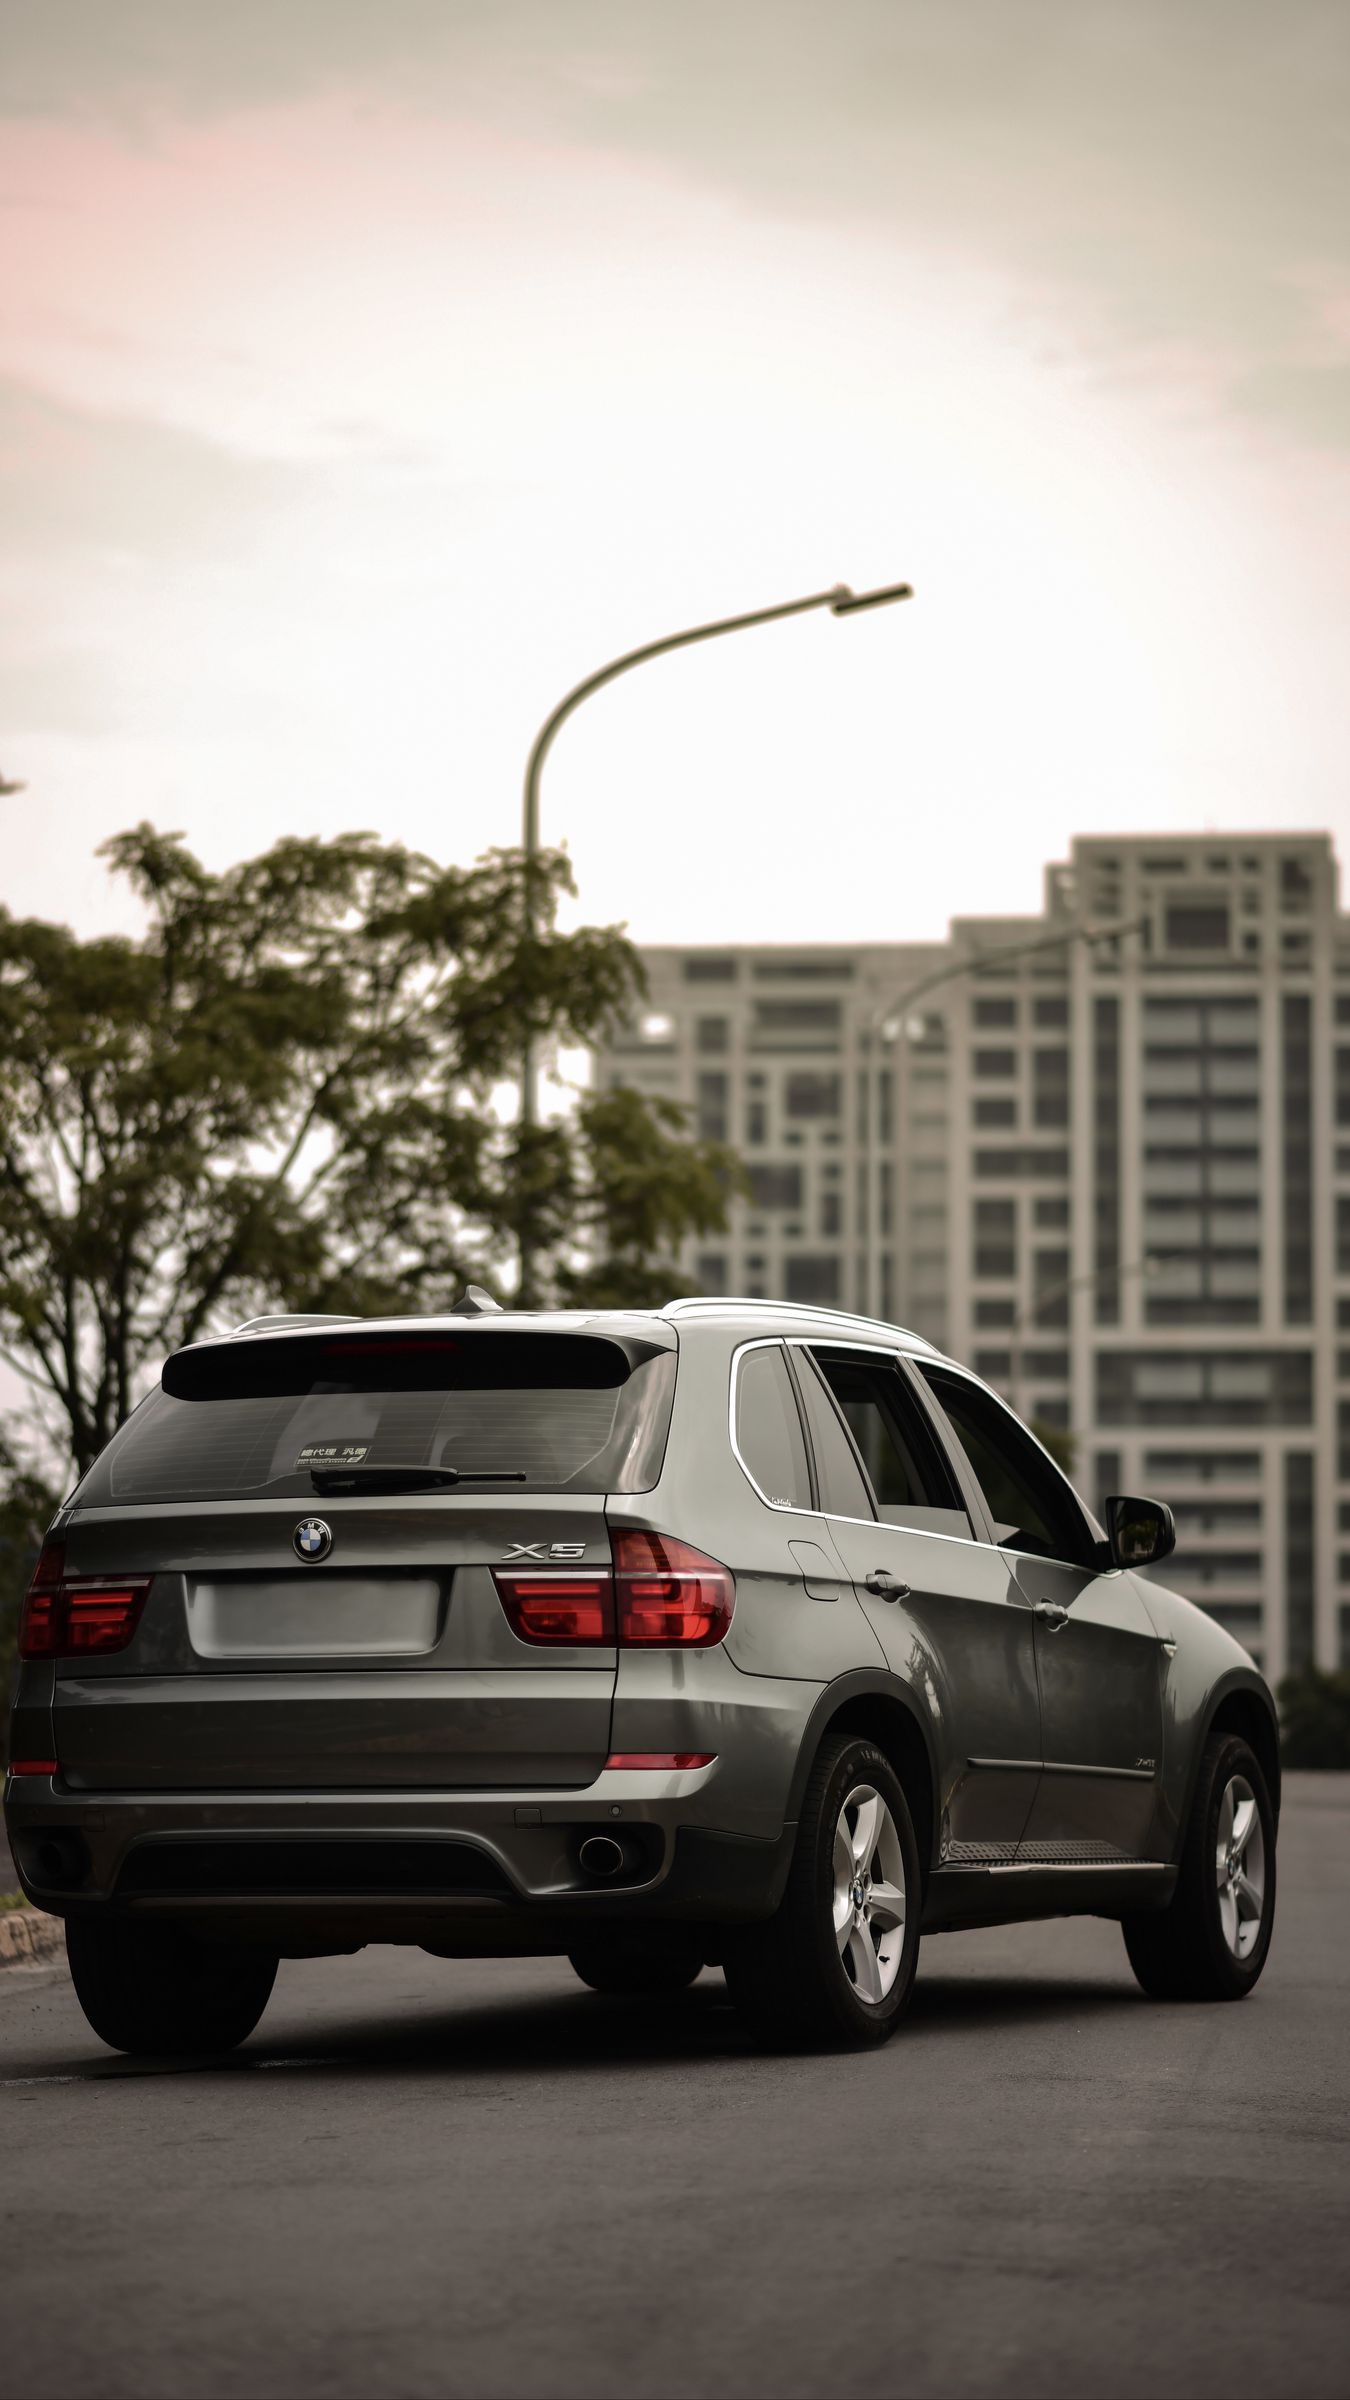 Download wallpaper 1350x2400 bmw x bmw, side view, suv iphone 8+/7+/6s+/for parallax HD background